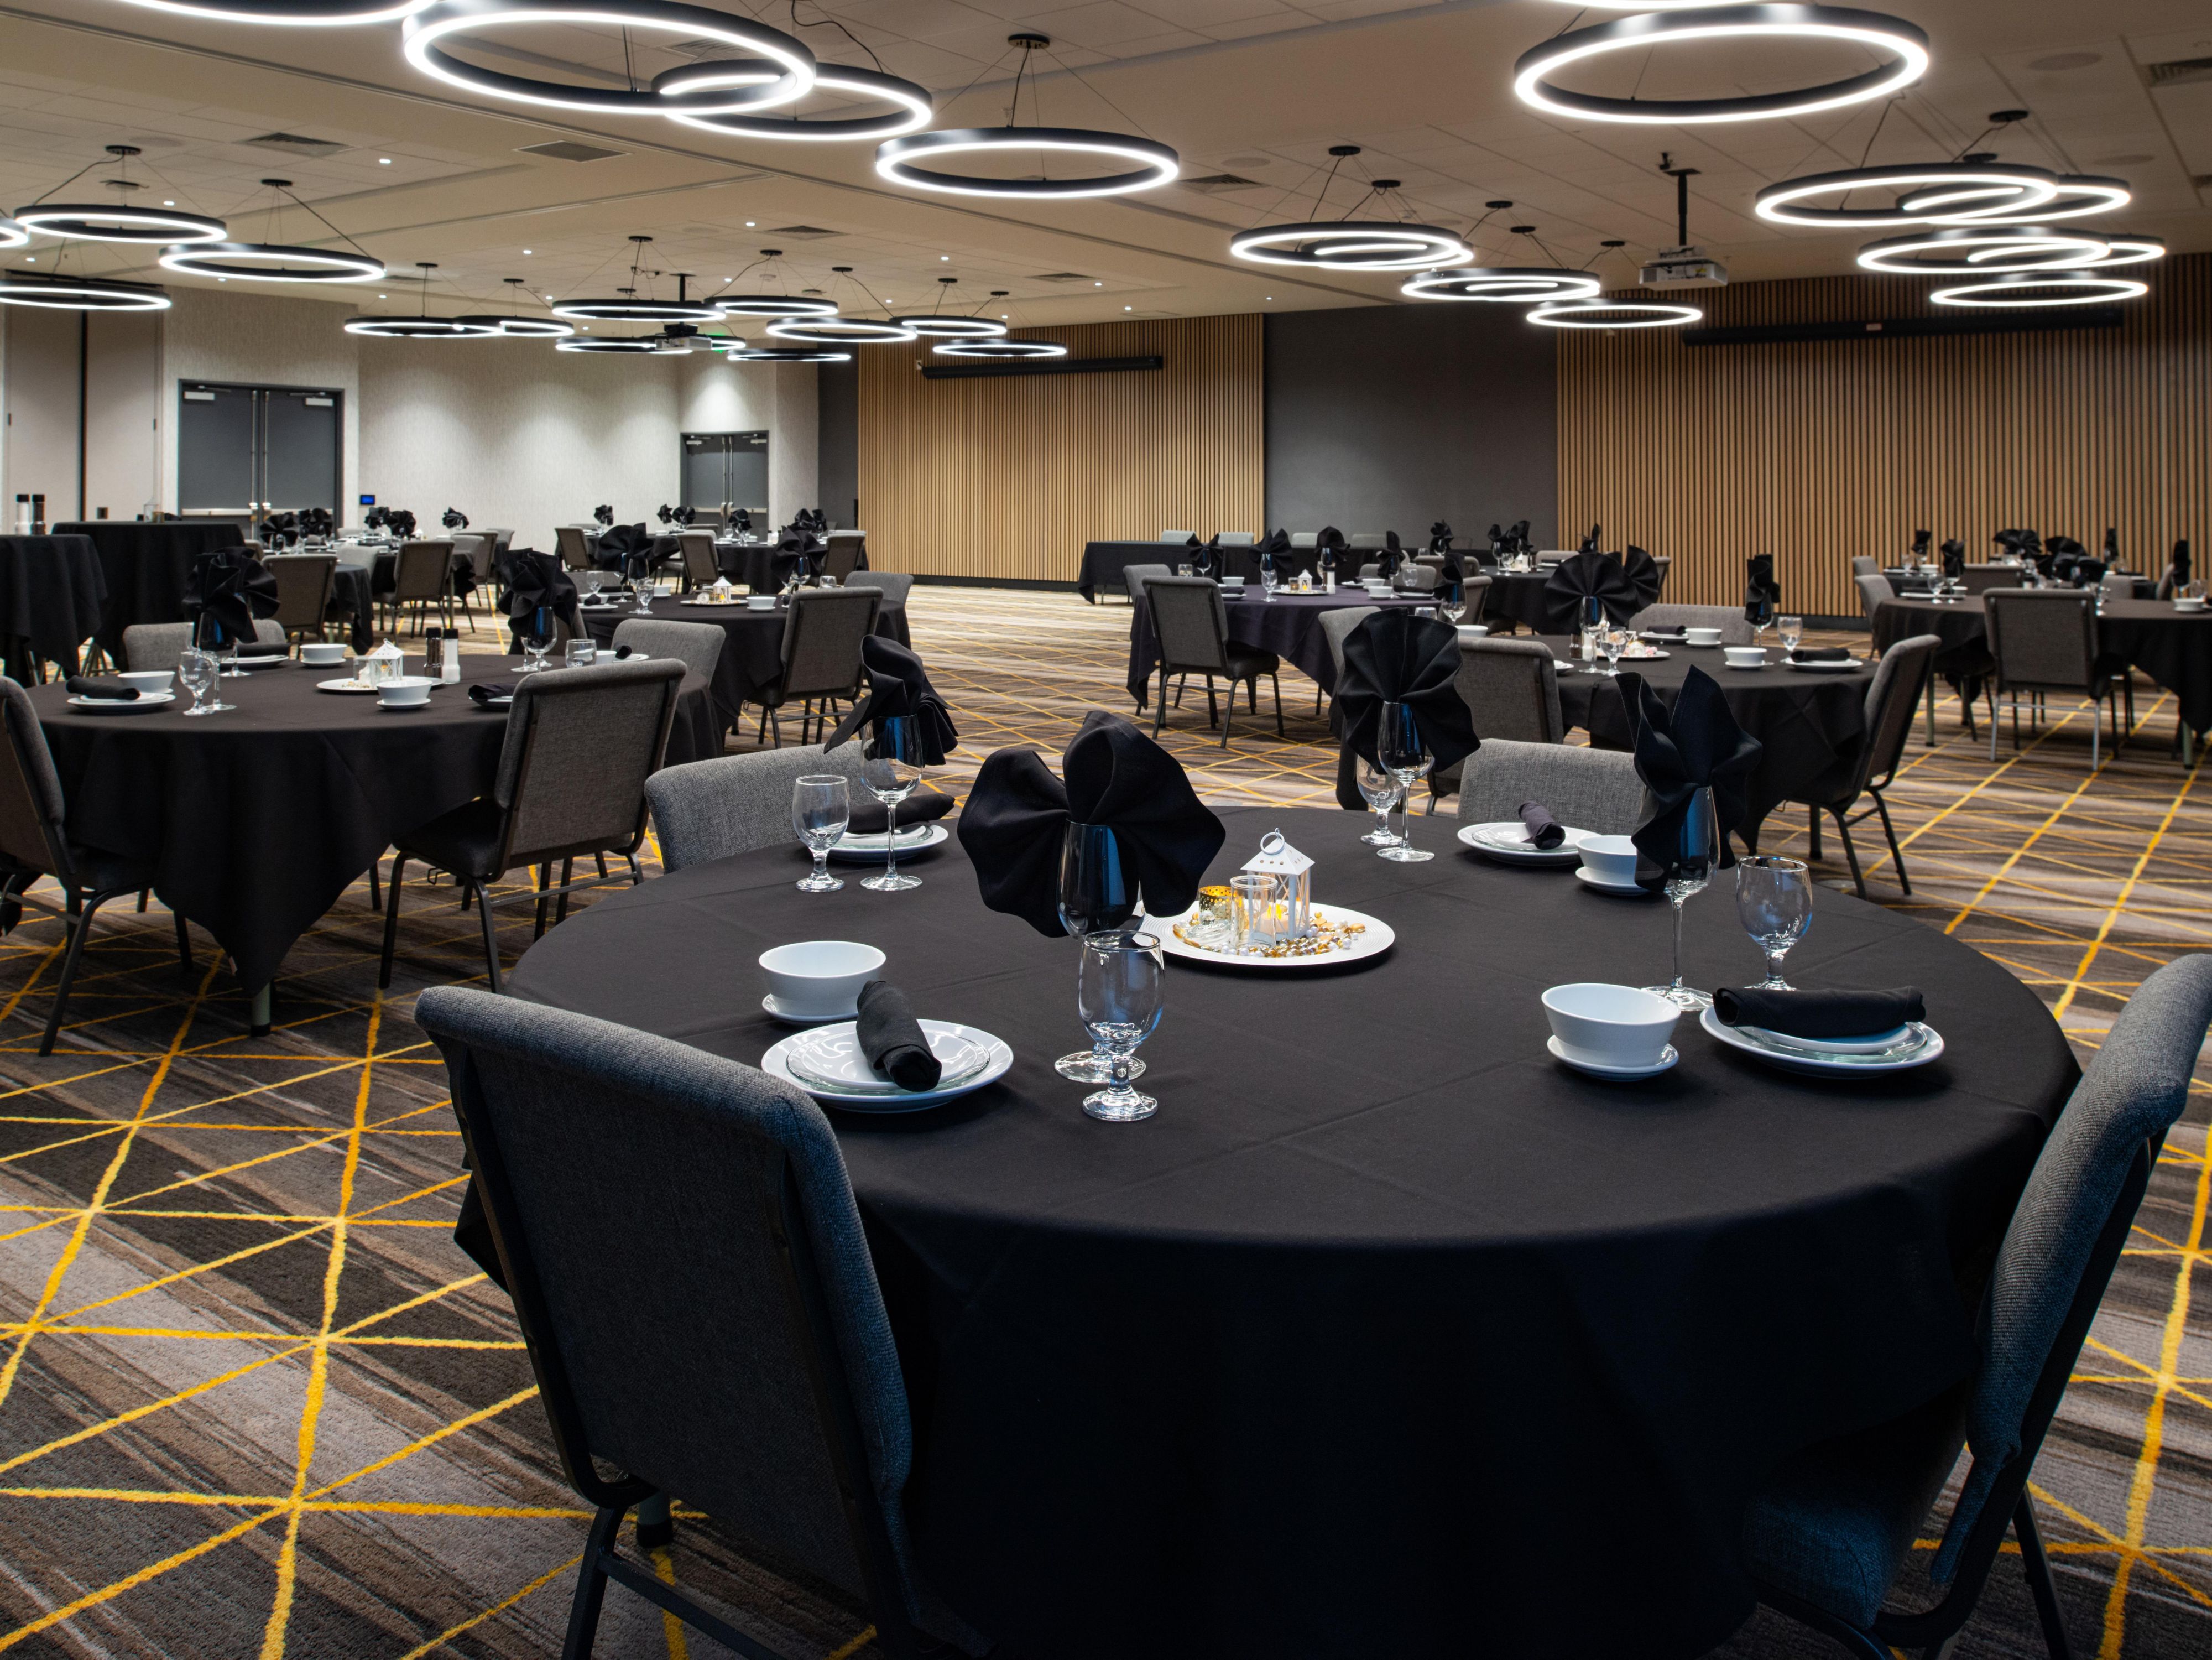 With just shy of 4600 sqft we can host up to a 325 person plated dinner, 500 person seminar, or break the room up in to 3 separate areas for your multi purpose meetings and conventions. We offer full on site catering to fit all needs and budgets. 